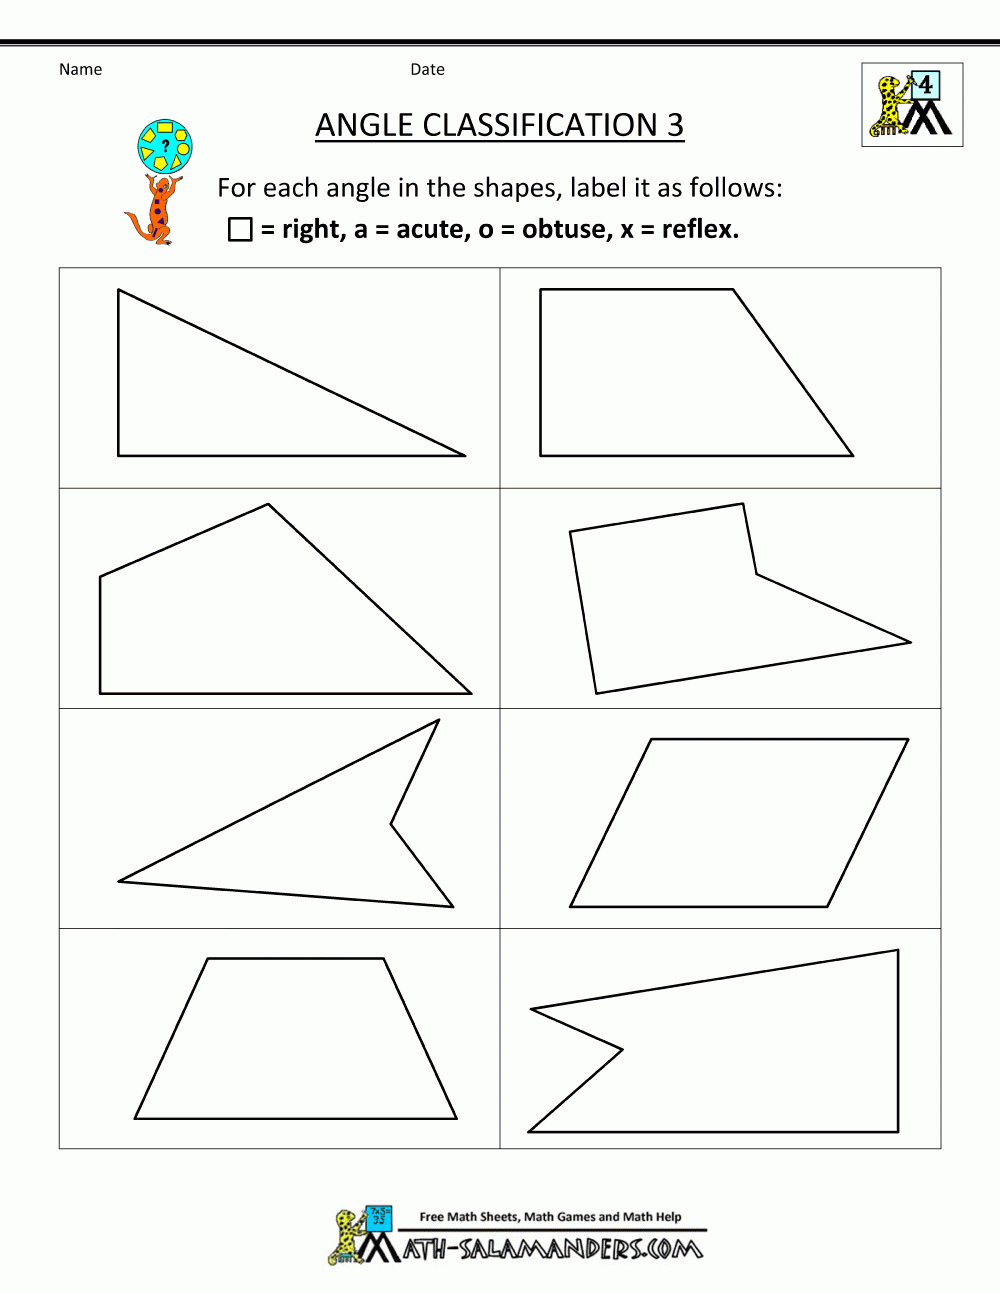 Common Core 4th Grade Math Geometry Worksheets